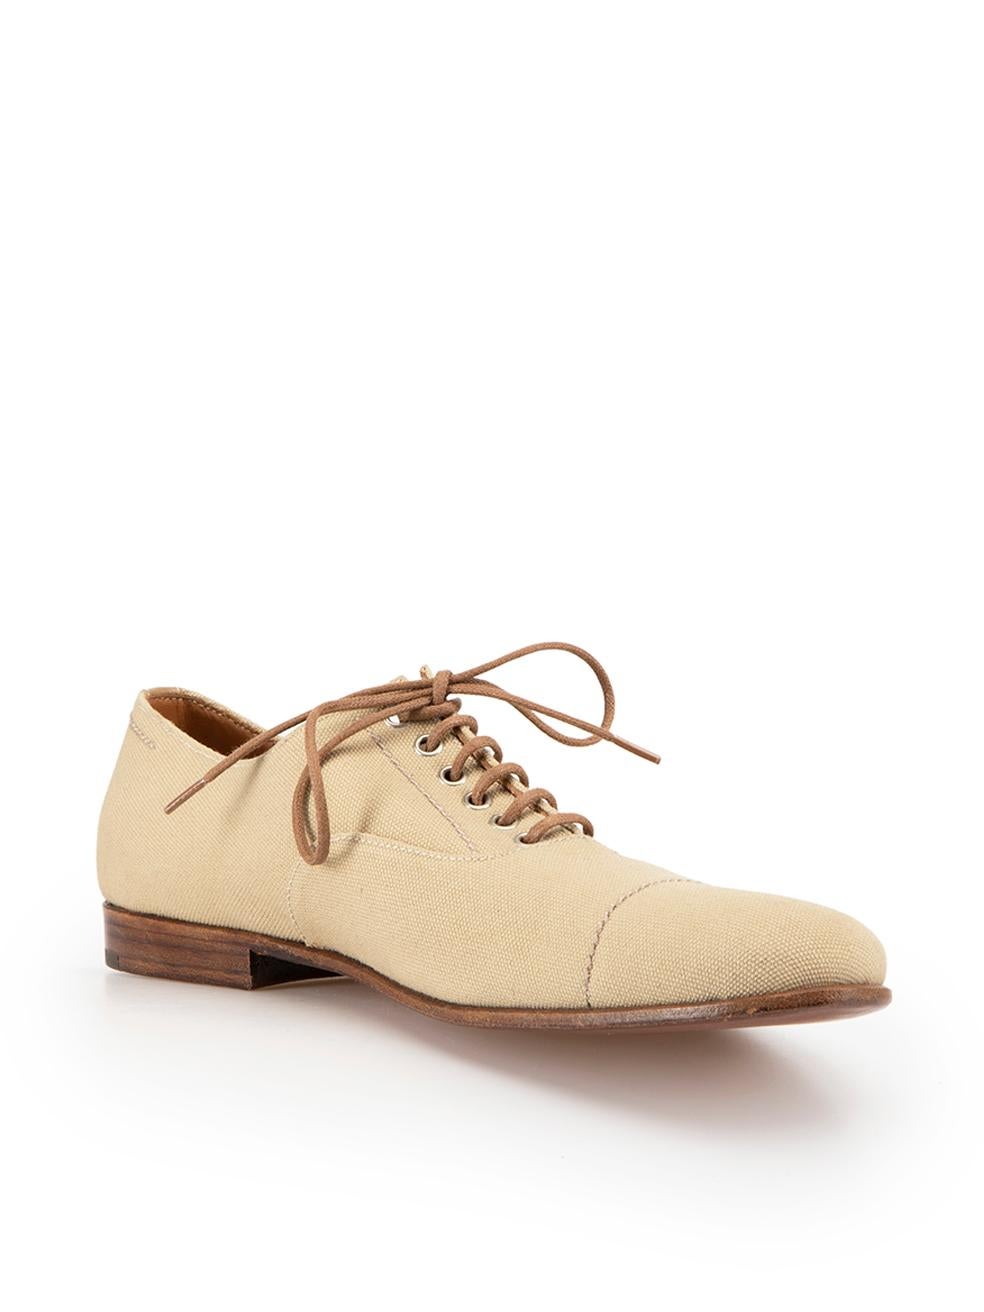 CONDITION is Very good. Hardly any visible wear to shoes is evident on this used Margaret Howell designer resale item.



Details


Beige

Canvas

Oxfords

Round-toe

Brown lace-up fastening



 

Made in Italy 

 

Composition

EXTERIOR: